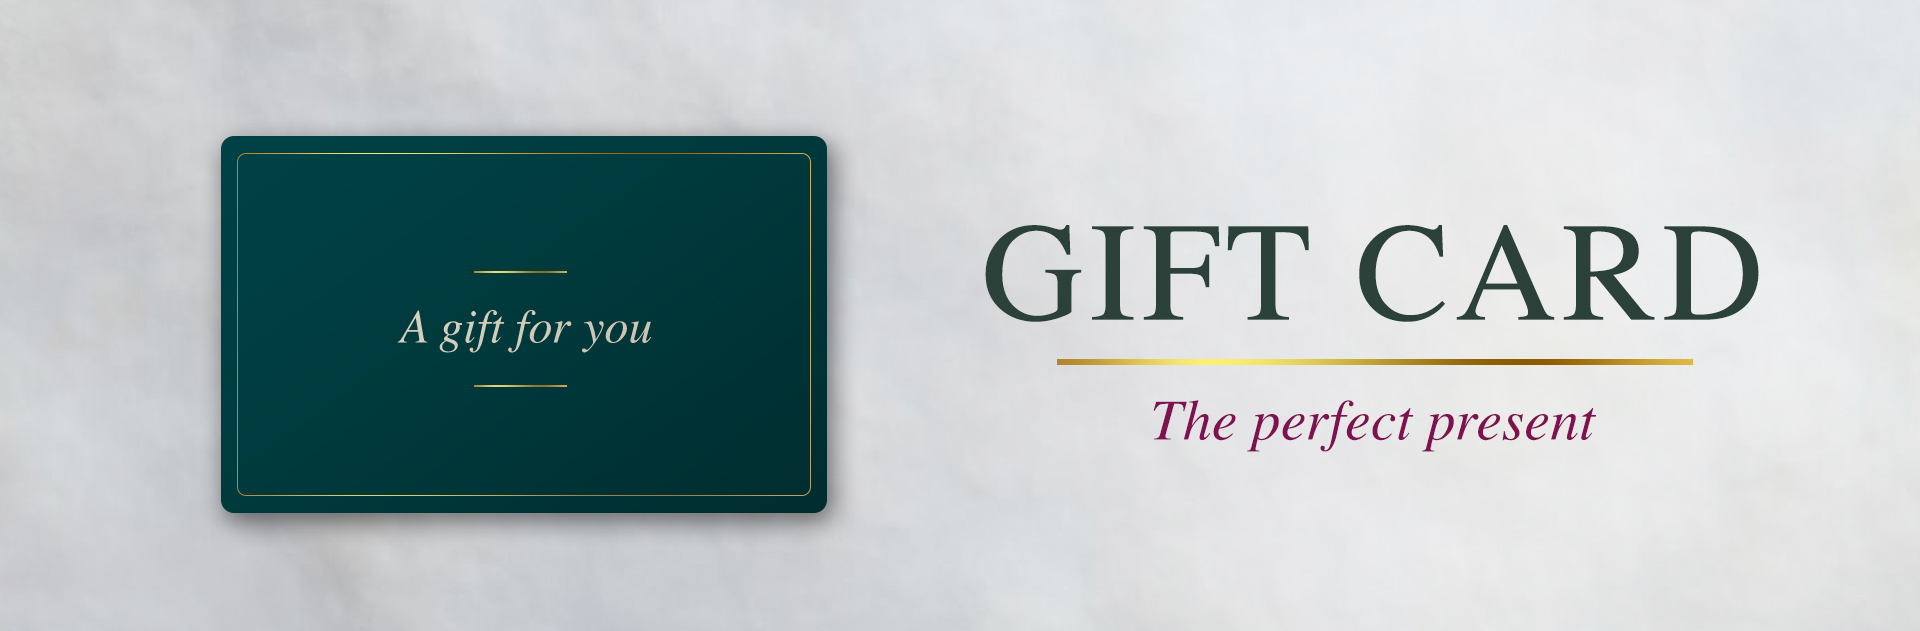 The Open Arms Gift Card